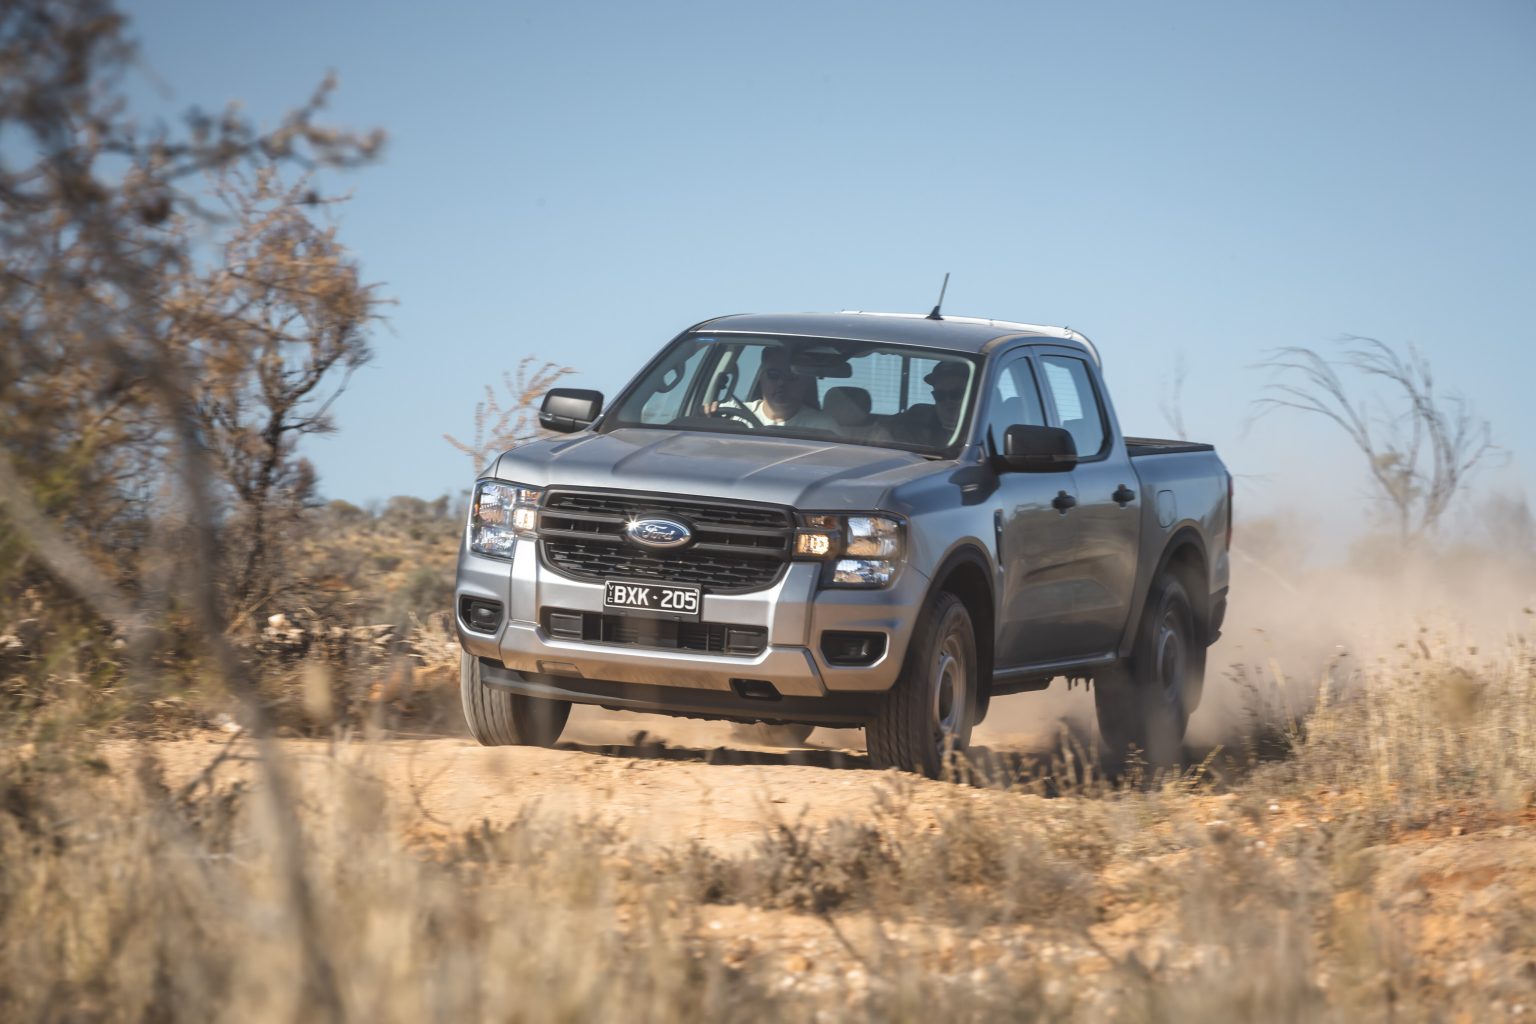 Ford Ranger XL - How about off-road?